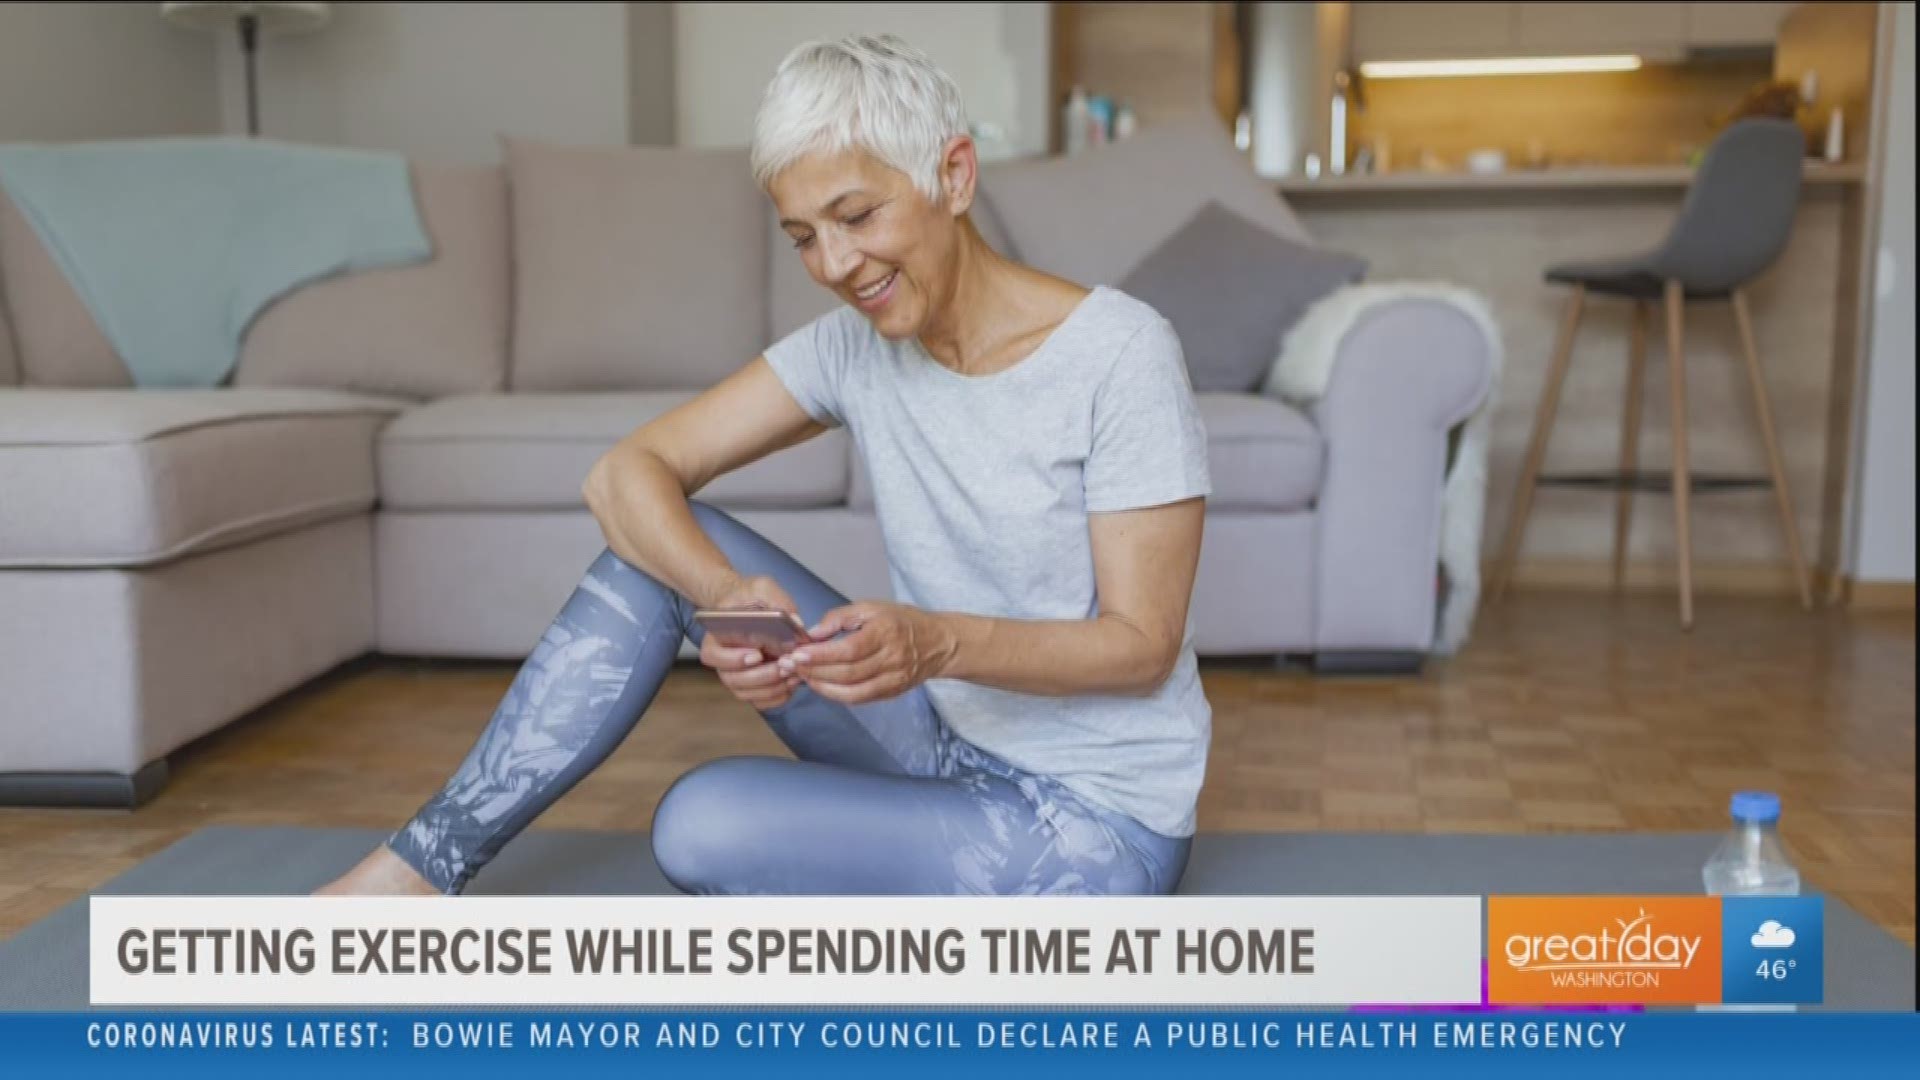 Don't just sit at home bored, it's a great time to be constructive! Fitness expert Bianca Jade shares some ways to stay fit and active while stuck in the house.